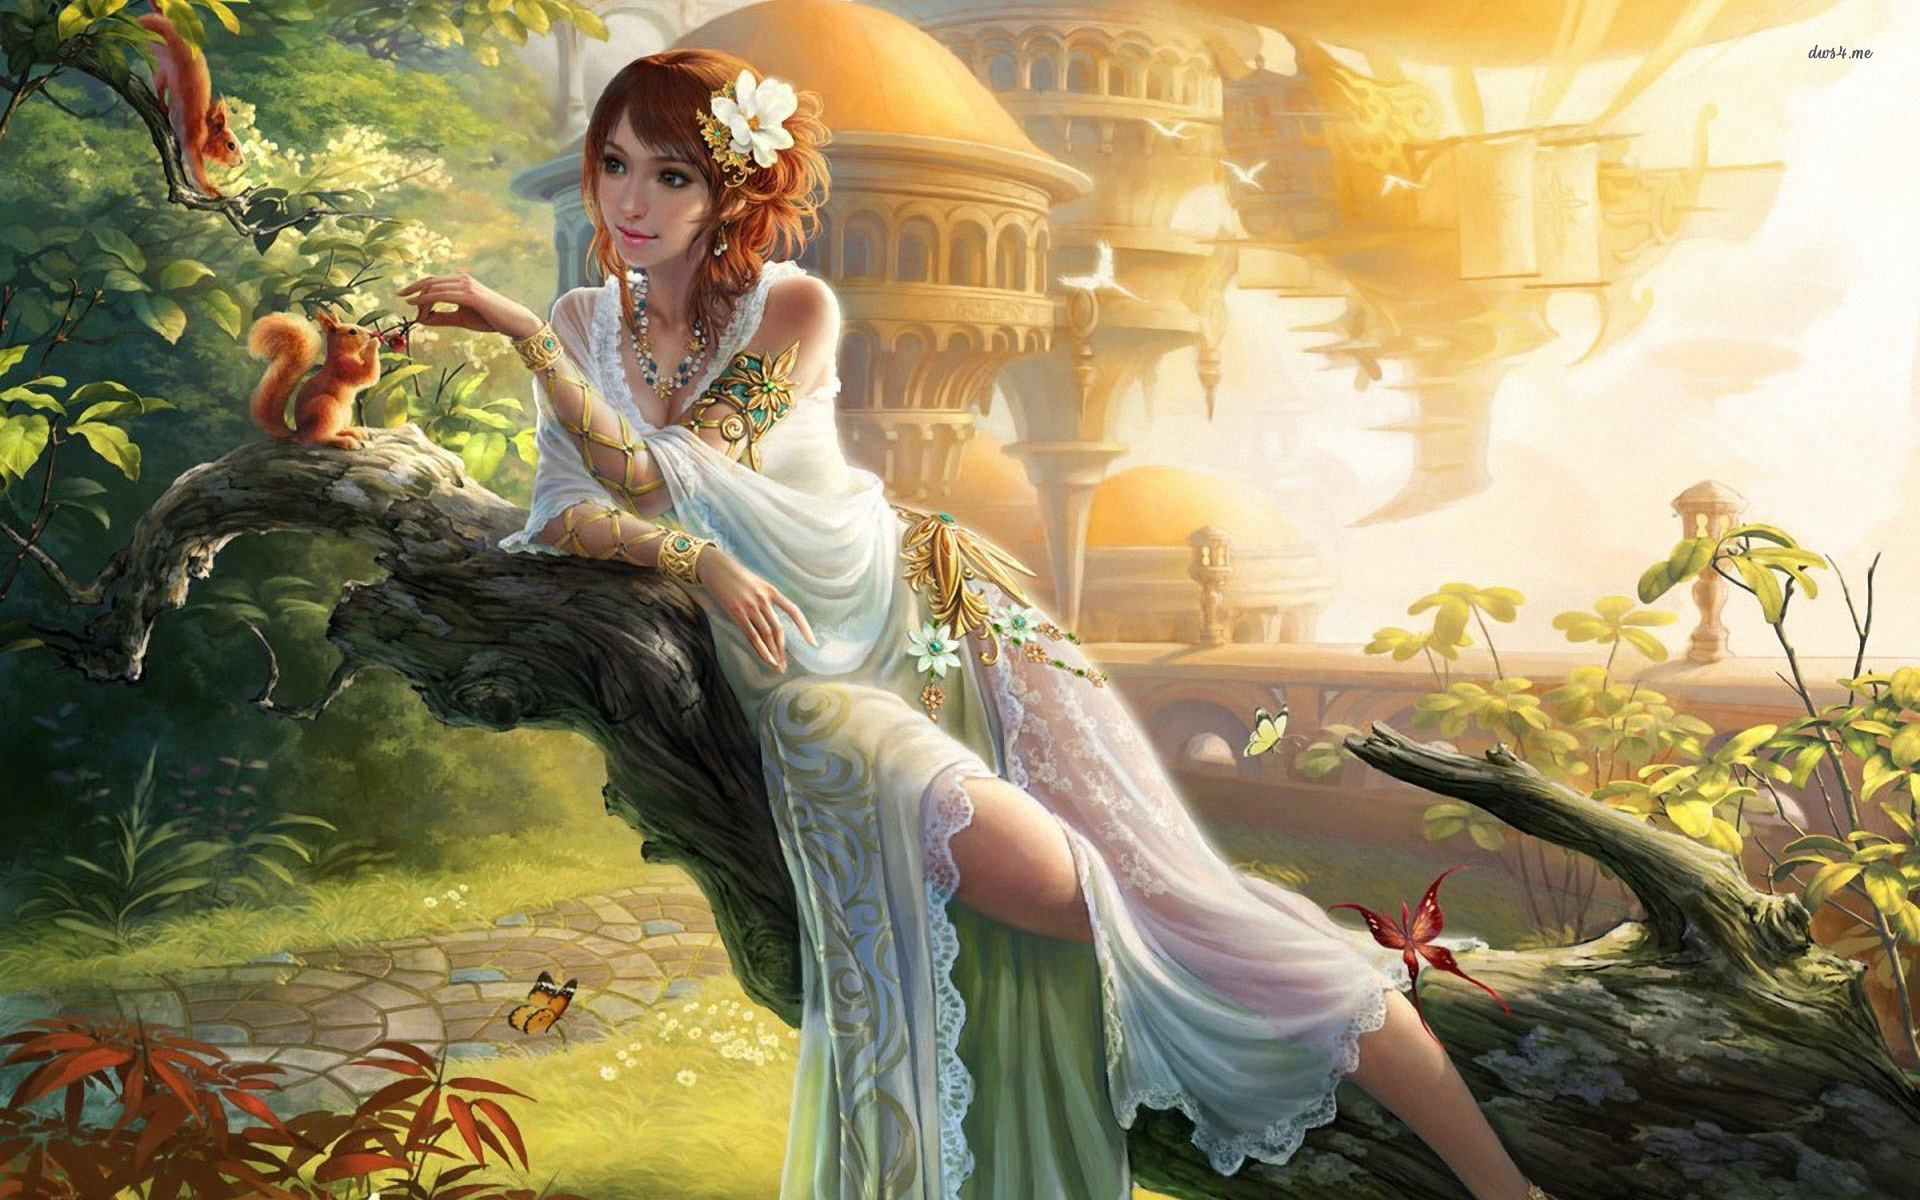 For Fairy Sitting On A Tree Trunk Fantasy Wallpaper